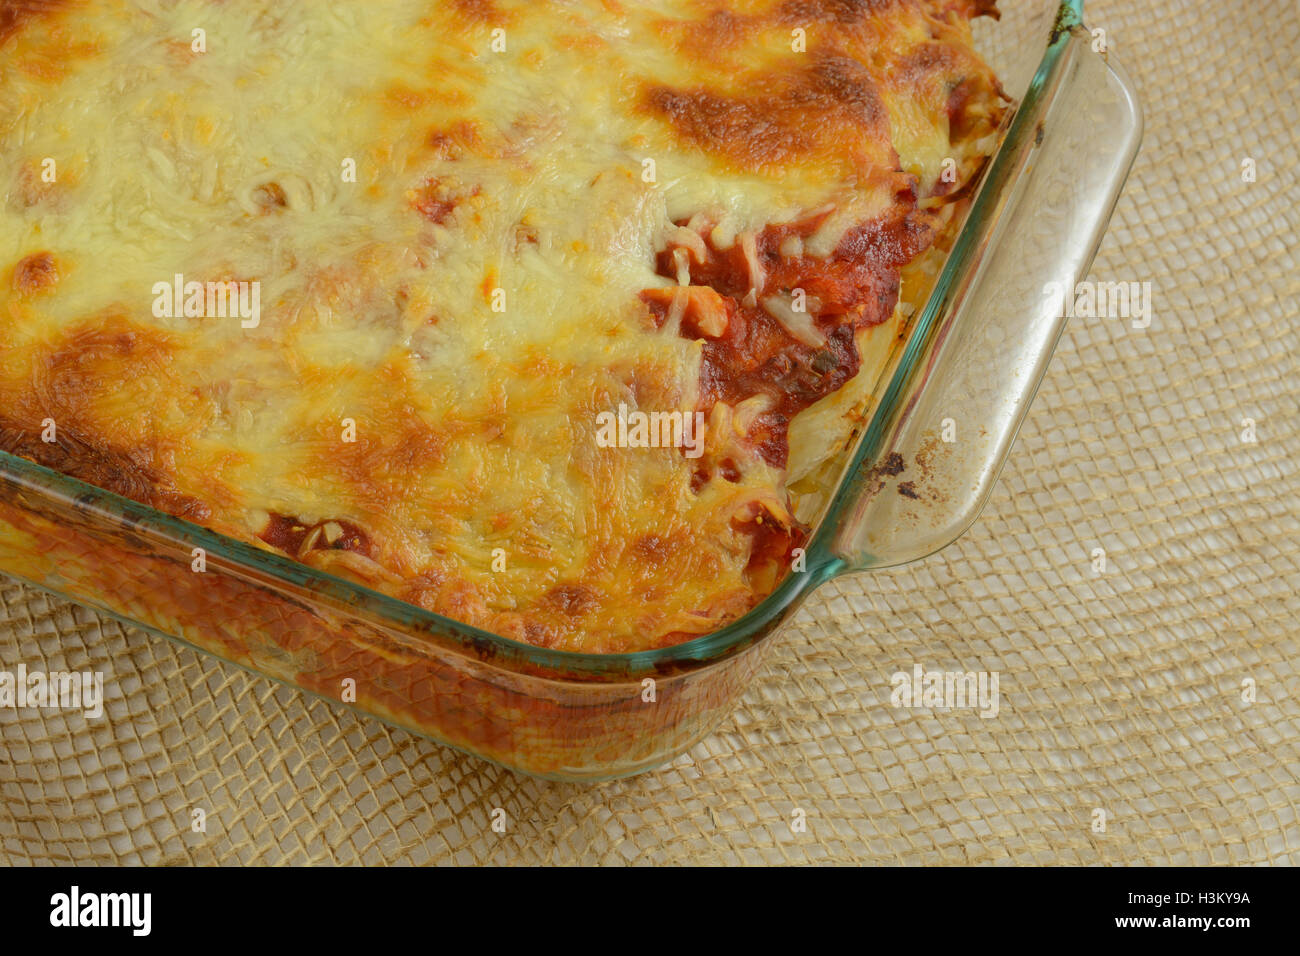 Close up of Casserole with pasta marinara sauce and melted cheese in glass baking dish Stock Photo